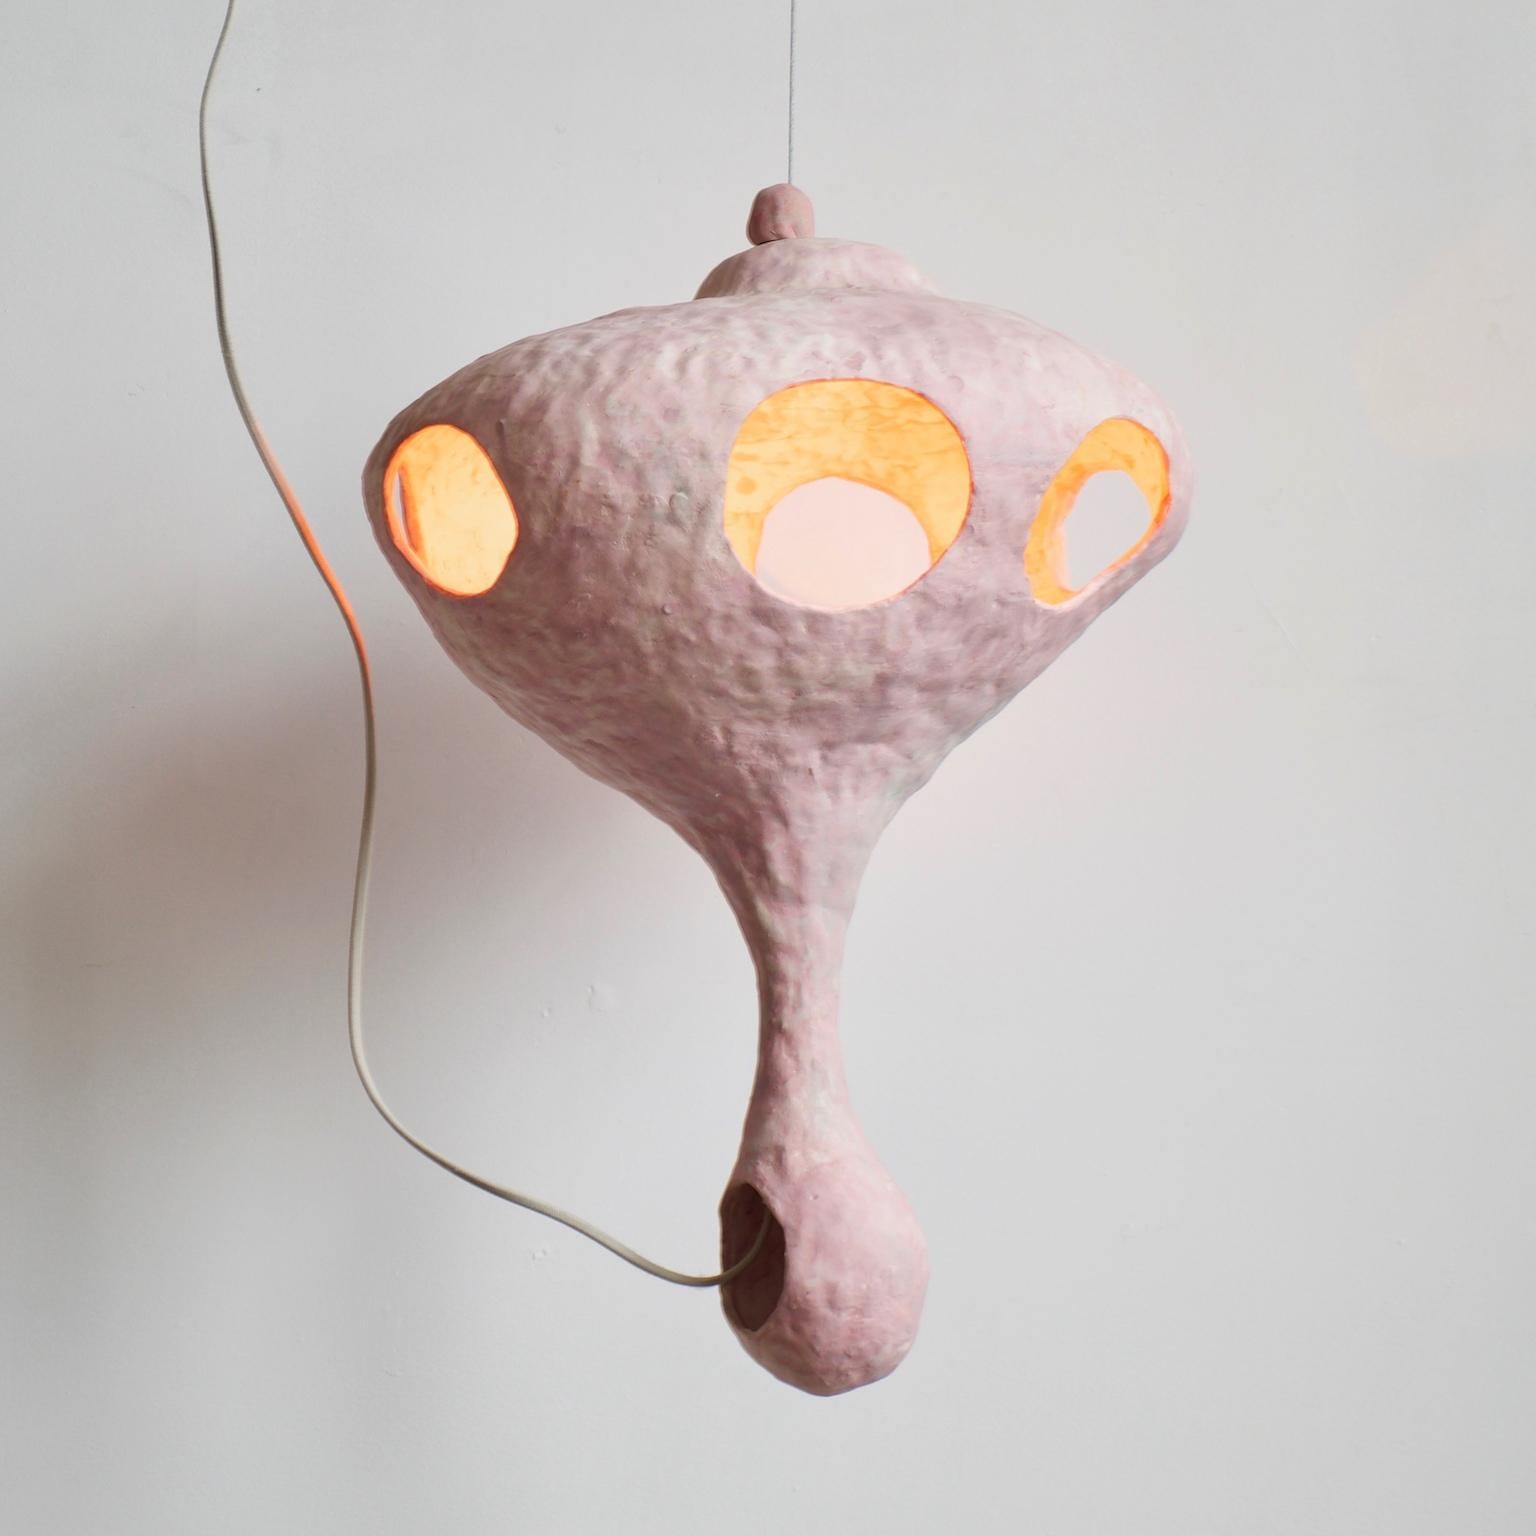 Floating objects surround you. You wonder if you too are floating in space, or perhaps in water. Gravity, the horizon, and the edges of the room disappear. You are happy.

Al-Fah is a pendant lamp from You See a Sheep, a lighting collection that